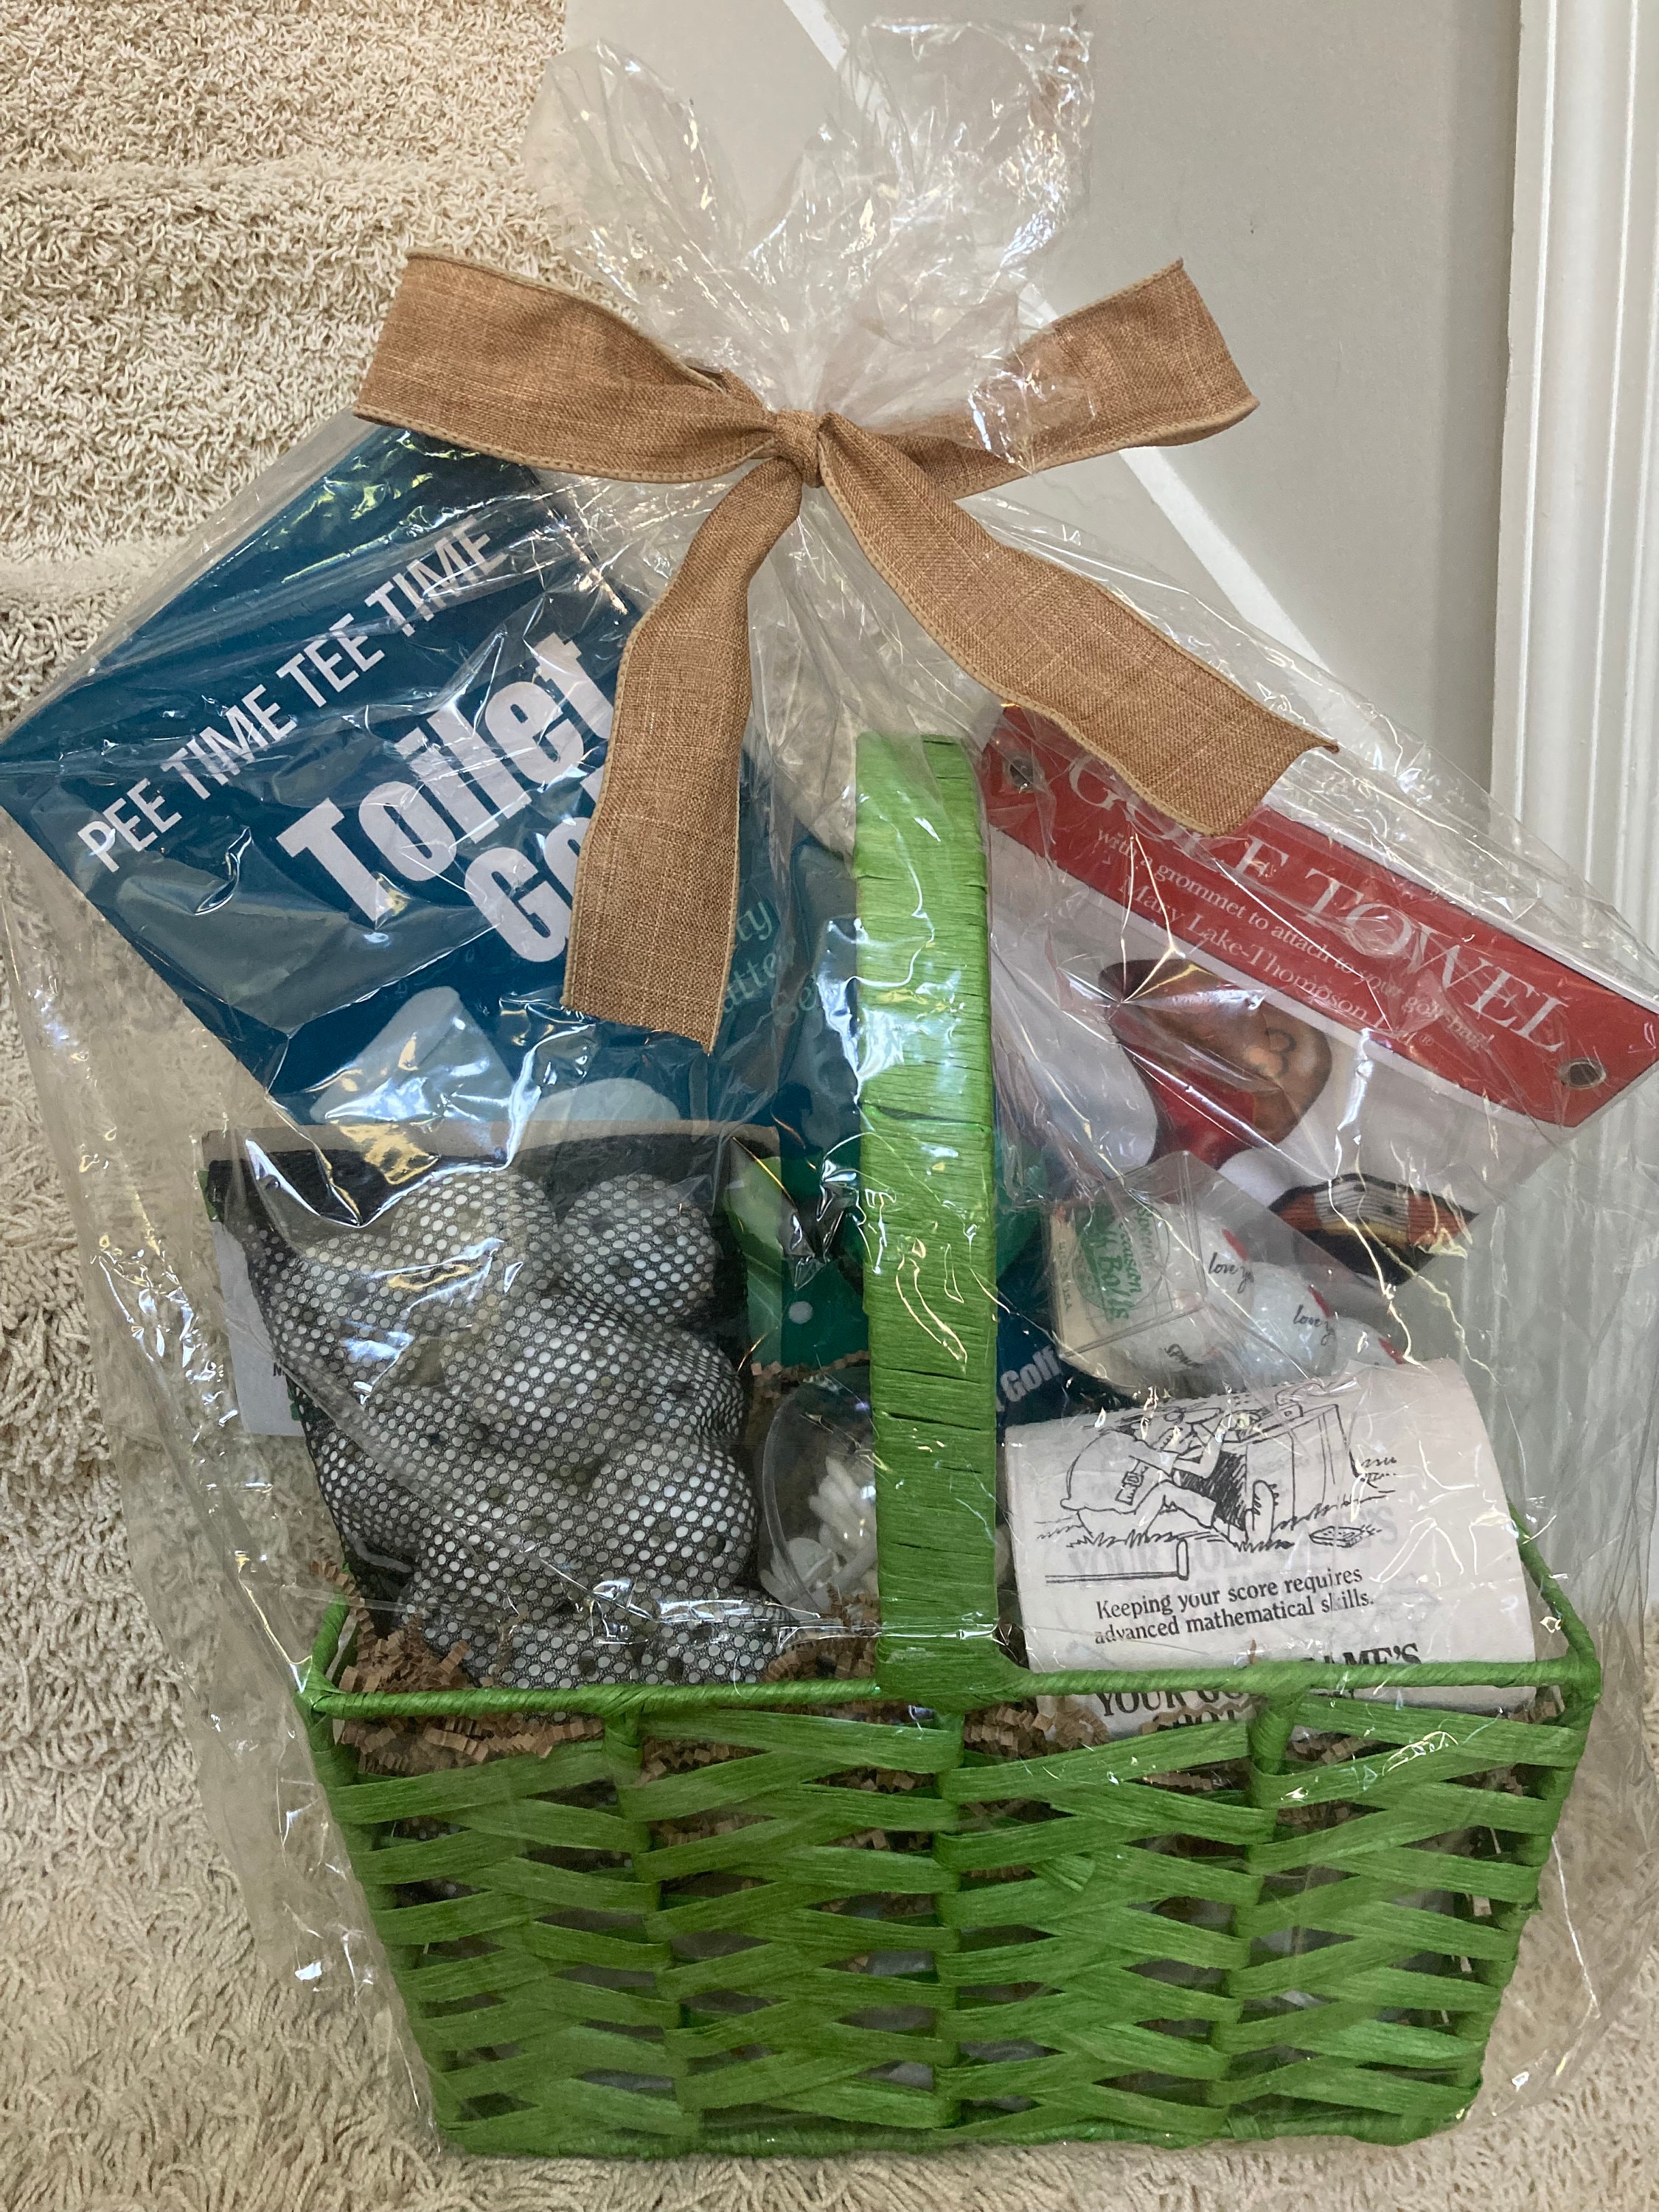 Fore! A Round of Golf, Gift Basket for Golfers